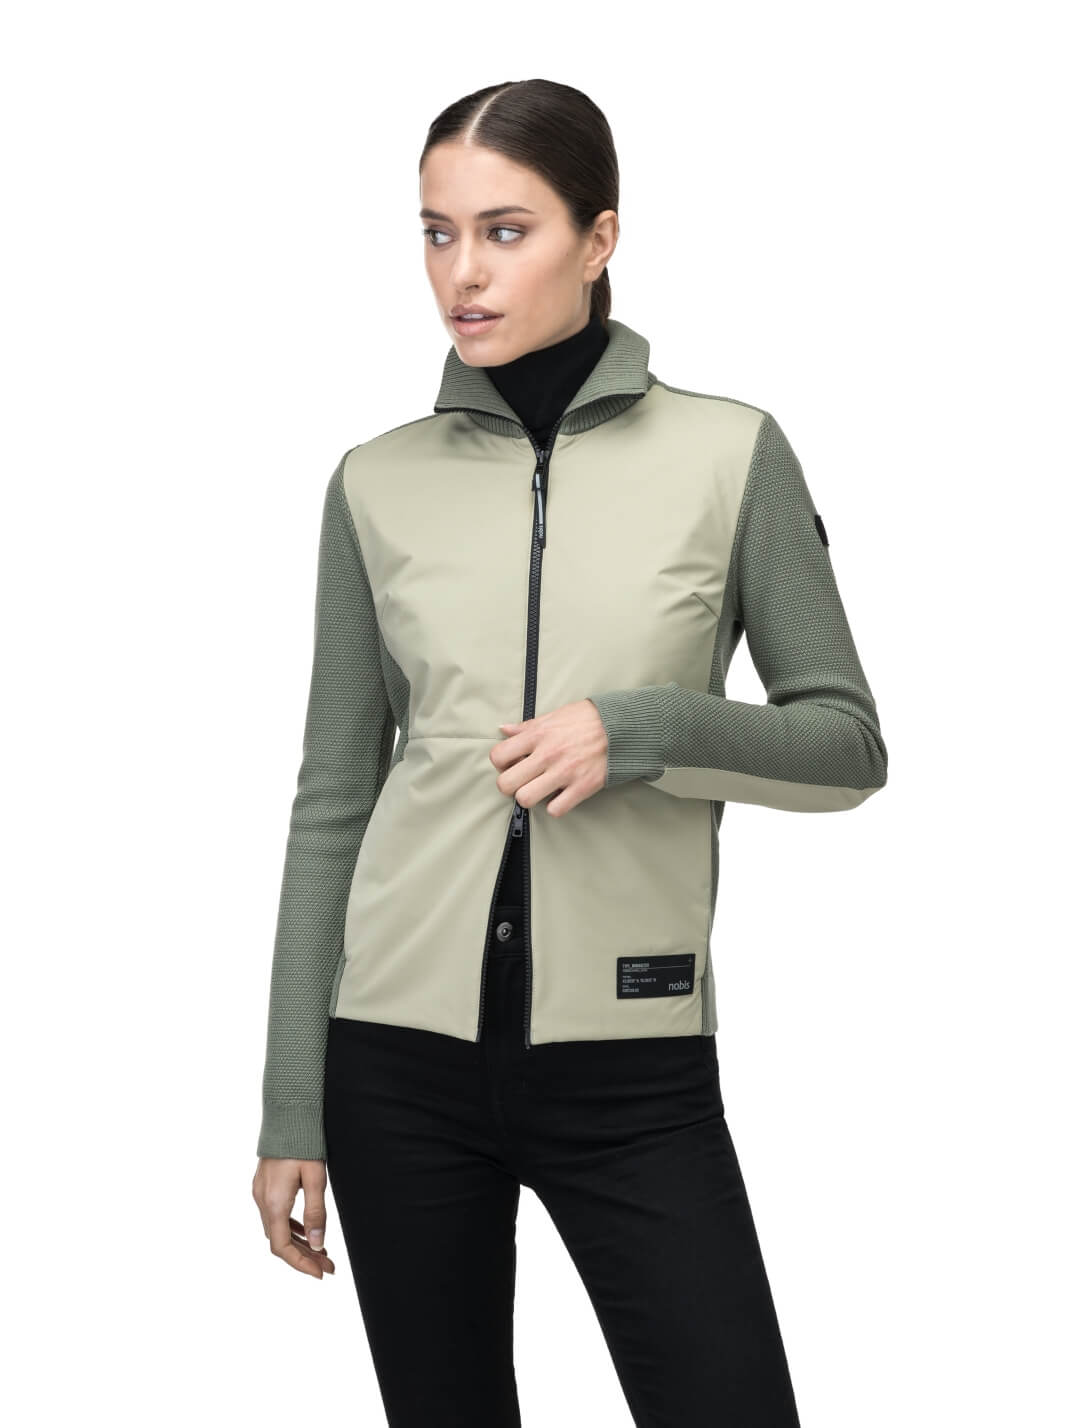 Evo Ladies Performance Full Zip Sweater in hip length, Primaloft Gold Insulation Active+, Merion wool knit collar, sleeves, back, and cuffs, two-way front zipper, and hidden waist pockets, in Clover